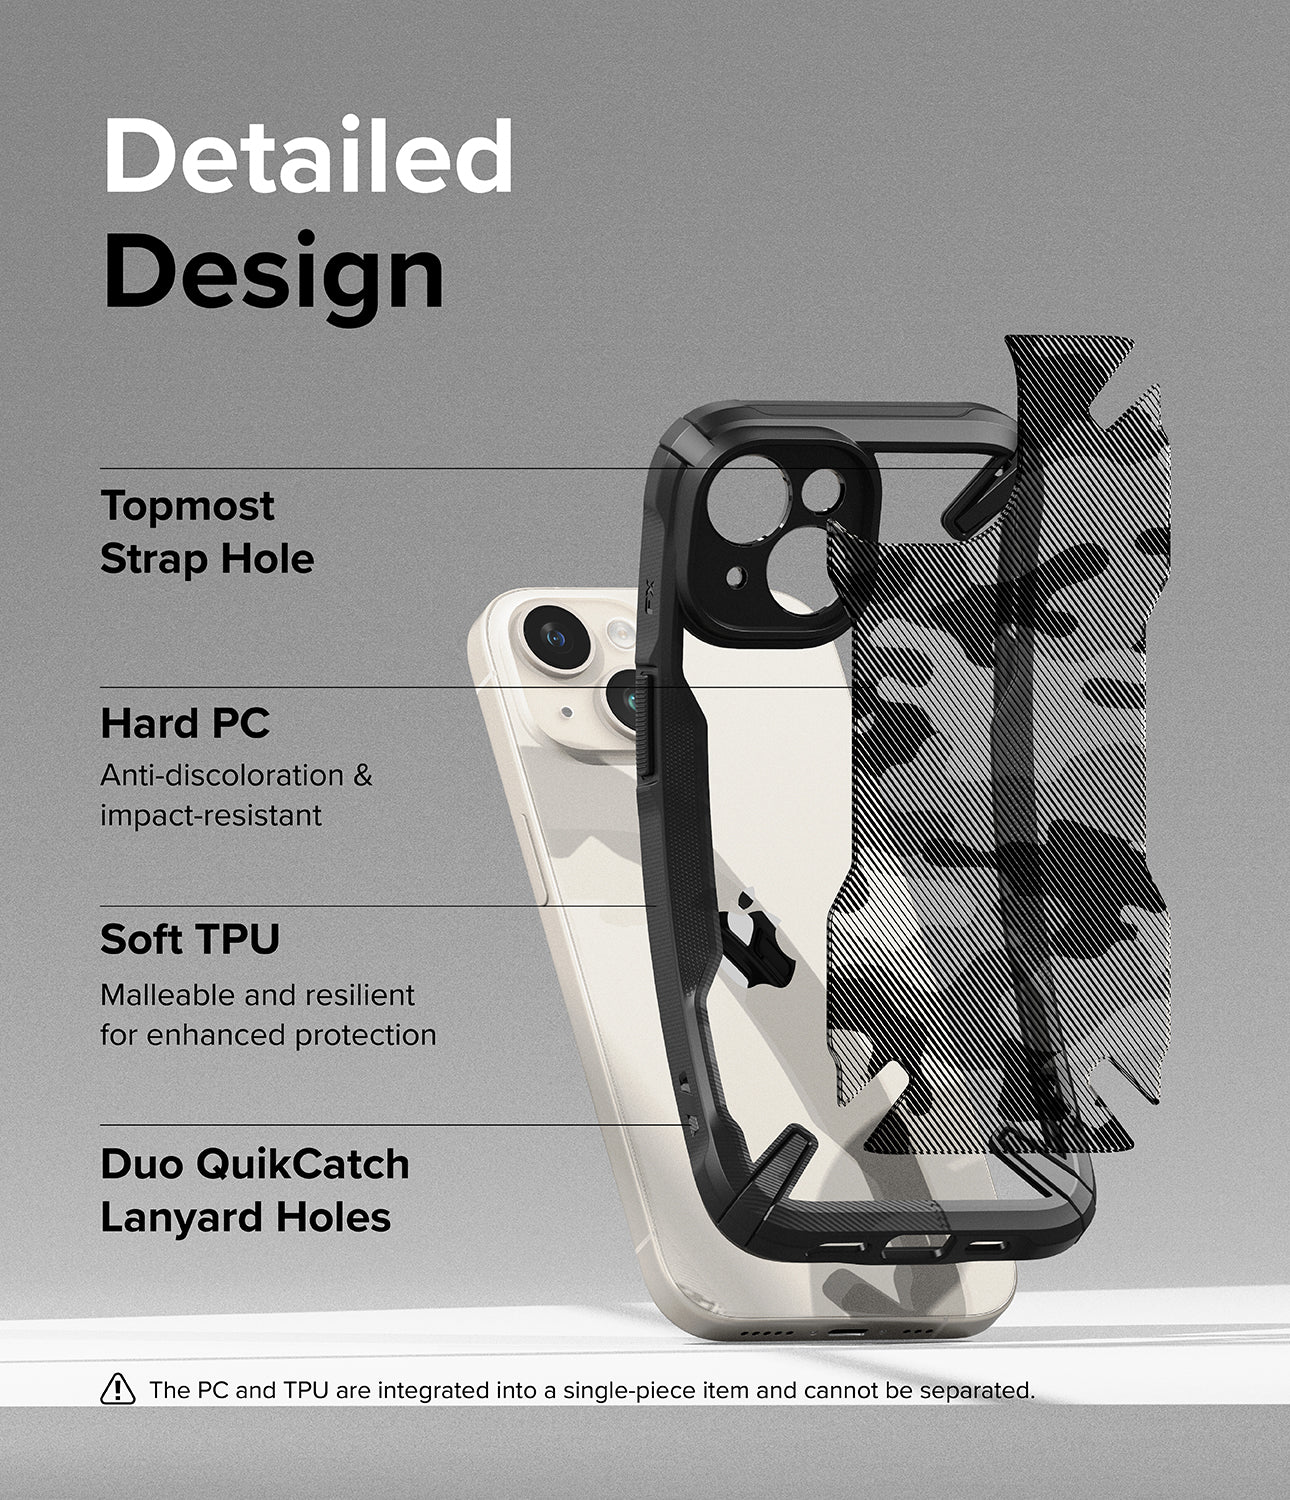 iPhone 15 Case | Fusion-X - Camo Black - Detailed Design. Topmost Strap Hole. Anti-discoloration and impact-resistant with Hard PC. Malleable and resilient for enhanced protection with Soft TPU. Duo QuikCatch Lanyard Holes.